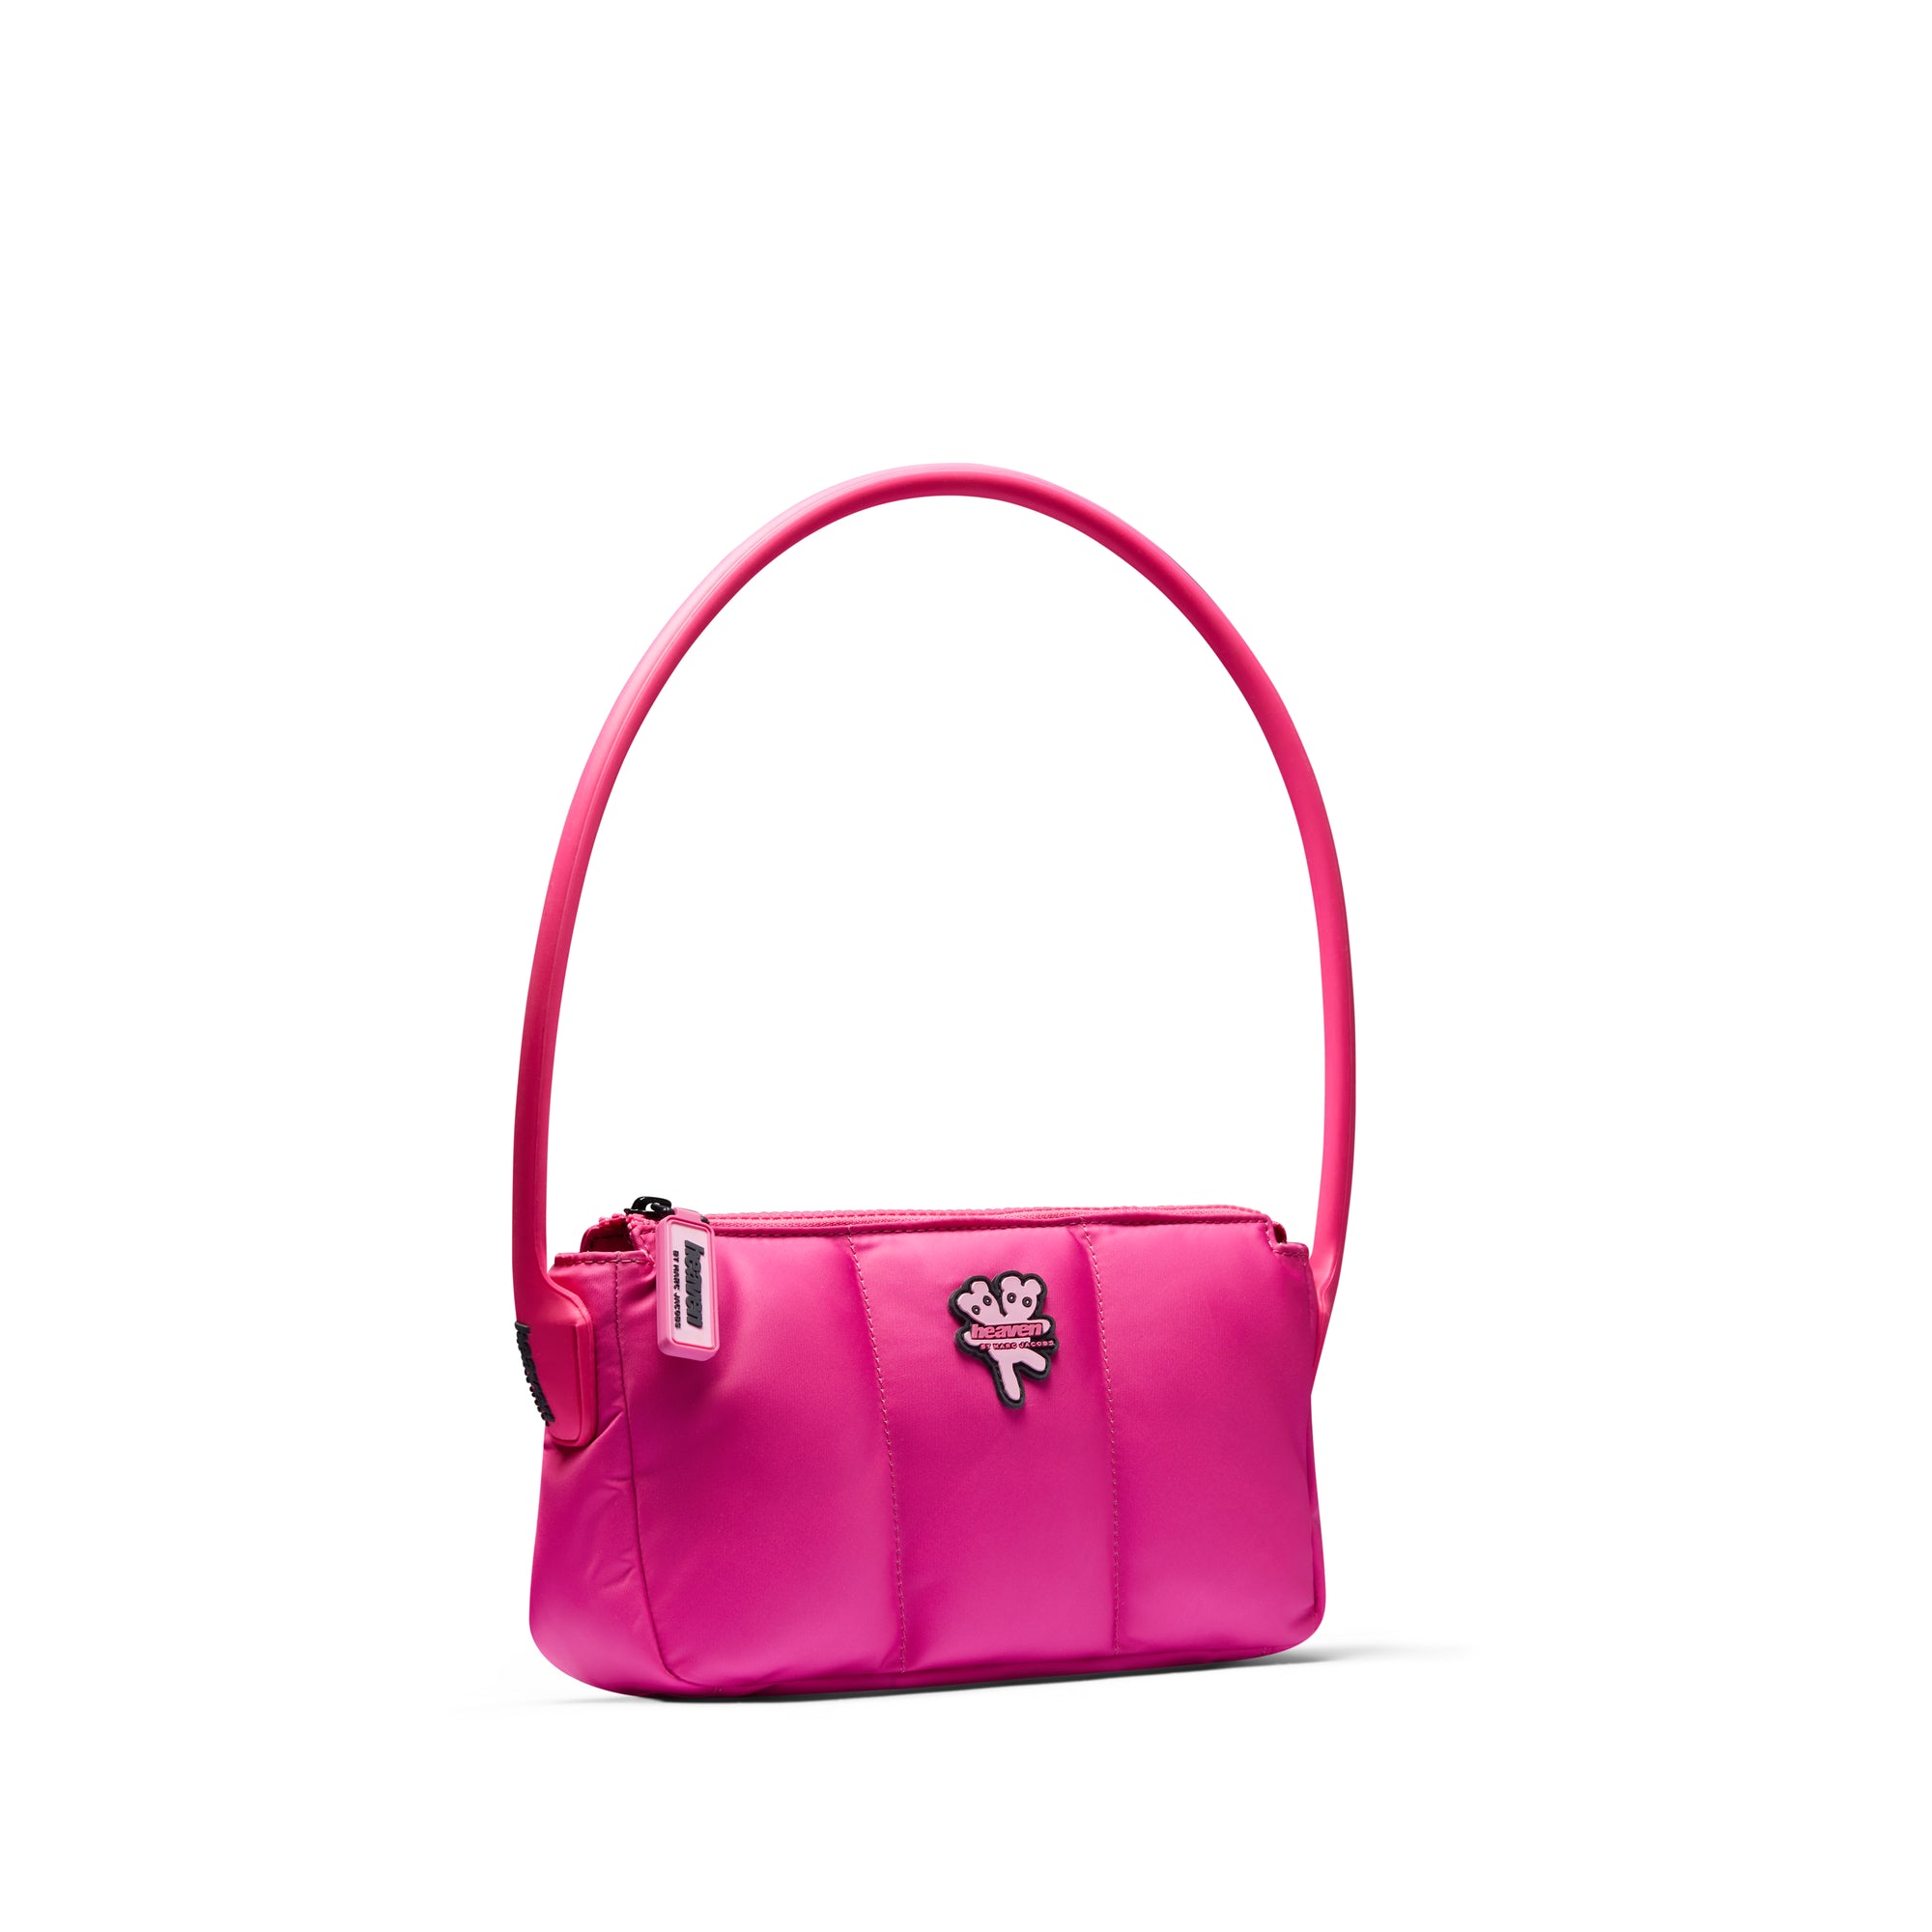 Heaven By Marc Jacobs - Women’s Shoulder Bag - (Hot Pink) view 2